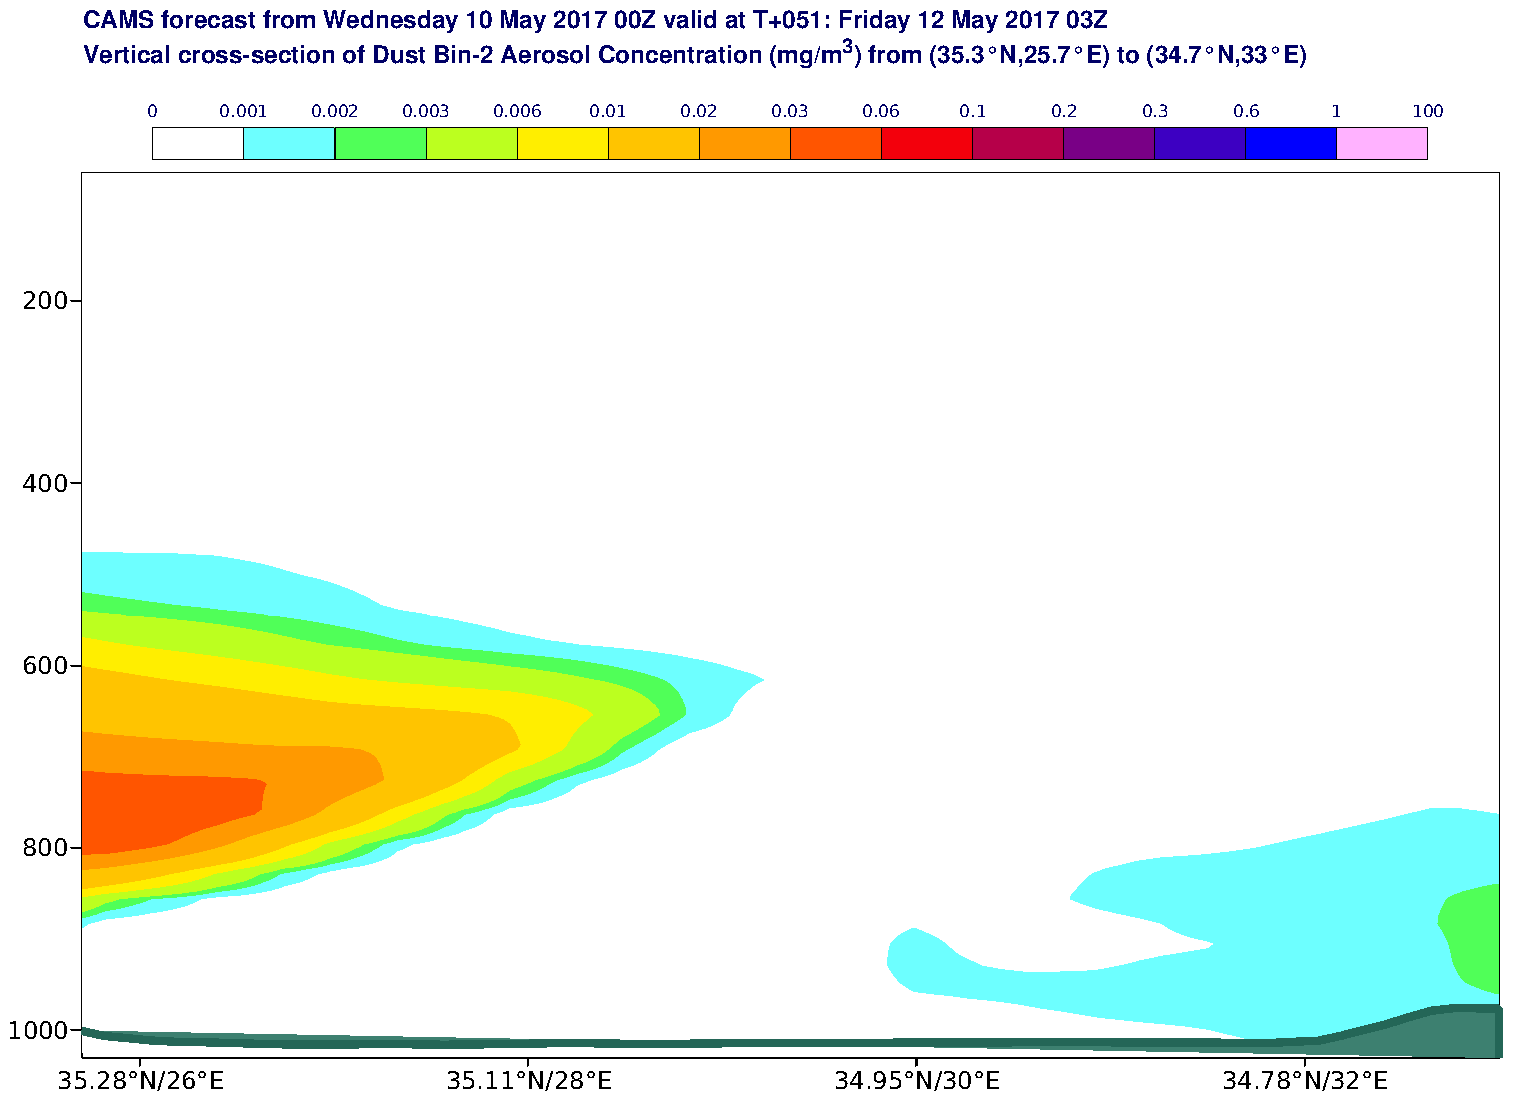 Vertical cross-section of Dust Bin-2 Aerosol Concentration (mg/m3) valid at T51 - 2017-05-12 03:00